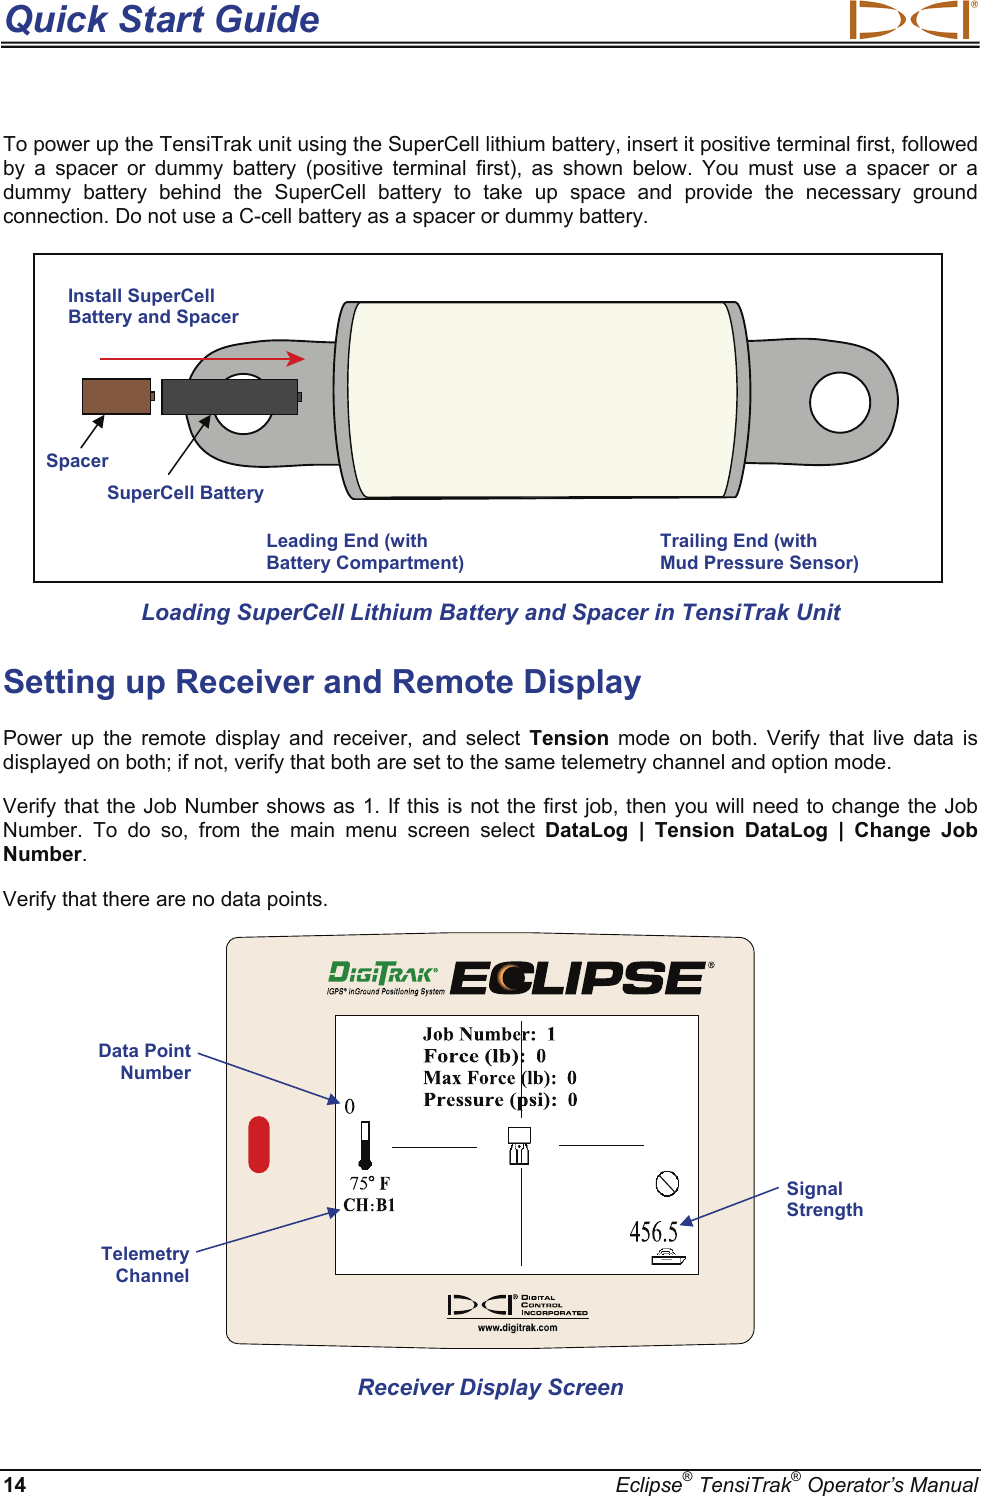 Quick Start Guide  14  Eclipse® TensiTrak® Operator’s Manual To power up the TensiTrak unit using the SuperCell lithium battery, insert it positive terminal first, followed by a spacer or dummy battery (positive terminal first), as shown below. You must use a spacer or a dummy battery behind the SuperCell battery to take up space and provide the necessary ground connection. Do not use a C-cell battery as a spacer or dummy battery.    Loading SuperCell Lithium Battery and Spacer in TensiTrak Unit  Setting up Receiver and Remote Display  Power up the remote display and receiver, and select Tension mode on both. Verify that live data is displayed on both; if not, verify that both are set to the same telemetry channel and option mode.  Verify that the Job Number shows as 1. If this is not the first job, then you will need to change the Job Number. To do so, from the main menu screen select DataLog | Tension DataLog | Change Job Number.  Verify that there are no data points.   Receiver Display Screen Data Point Number Signal Strength Telemetry Channel Leading End (with Battery Compartment) Trailing End (with  Mud Pressure Sensor) Install SuperCell Battery and Spacer  Spacer SuperCell Battery 